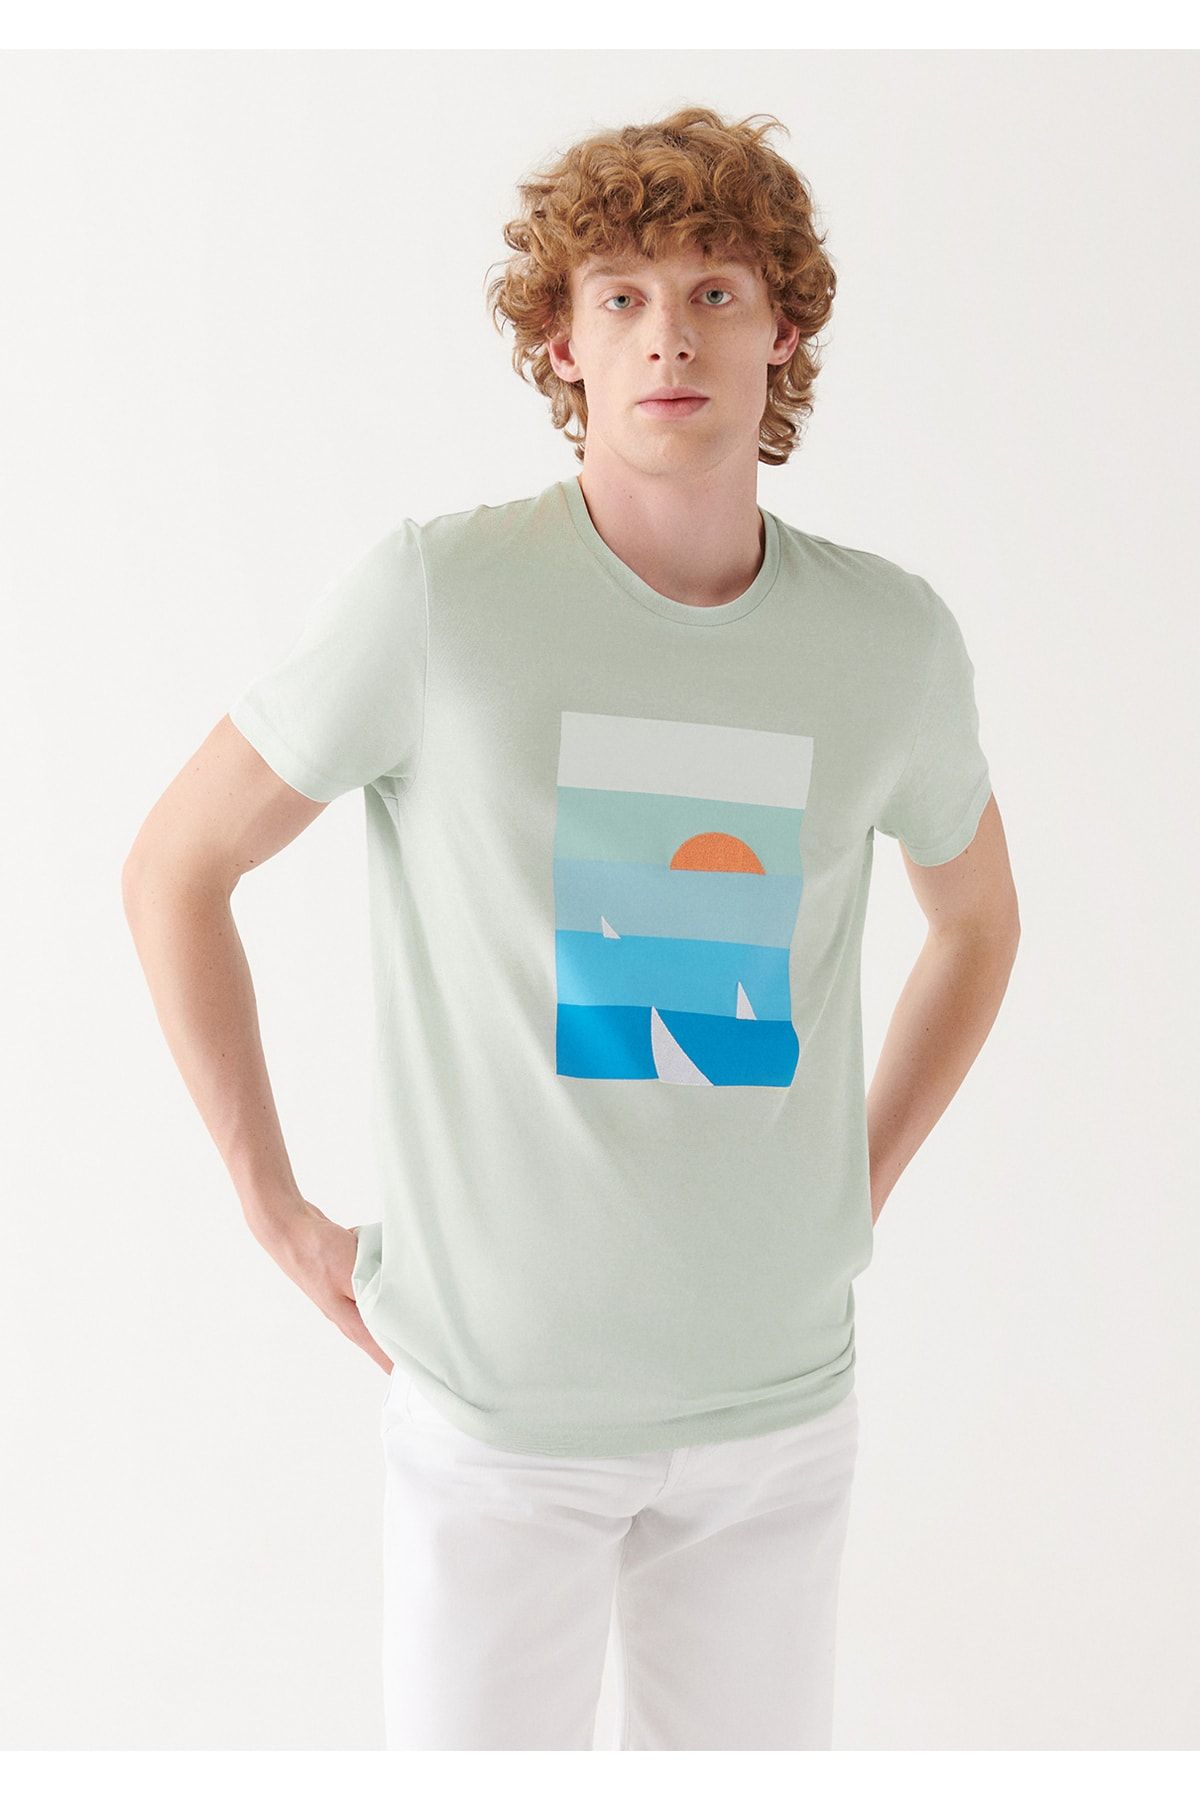 LTB Men's T-Shirts | Comfortable and Fashionable - Trendyol